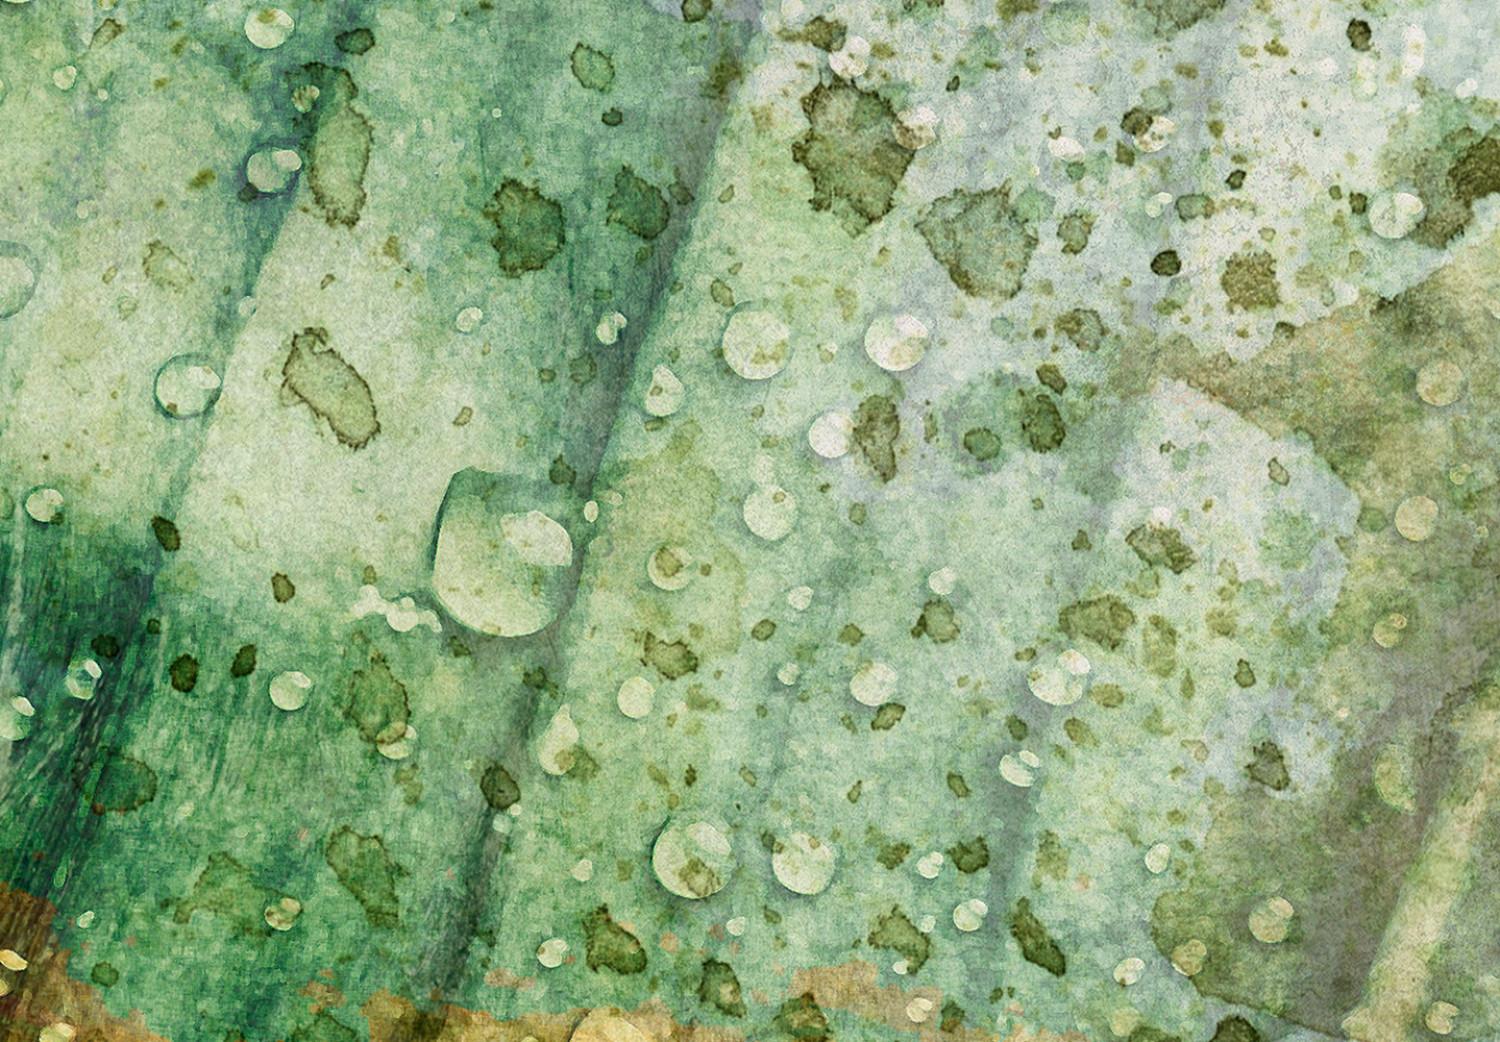 Canvas Rain drops on a leaf - Botanical theme in green color